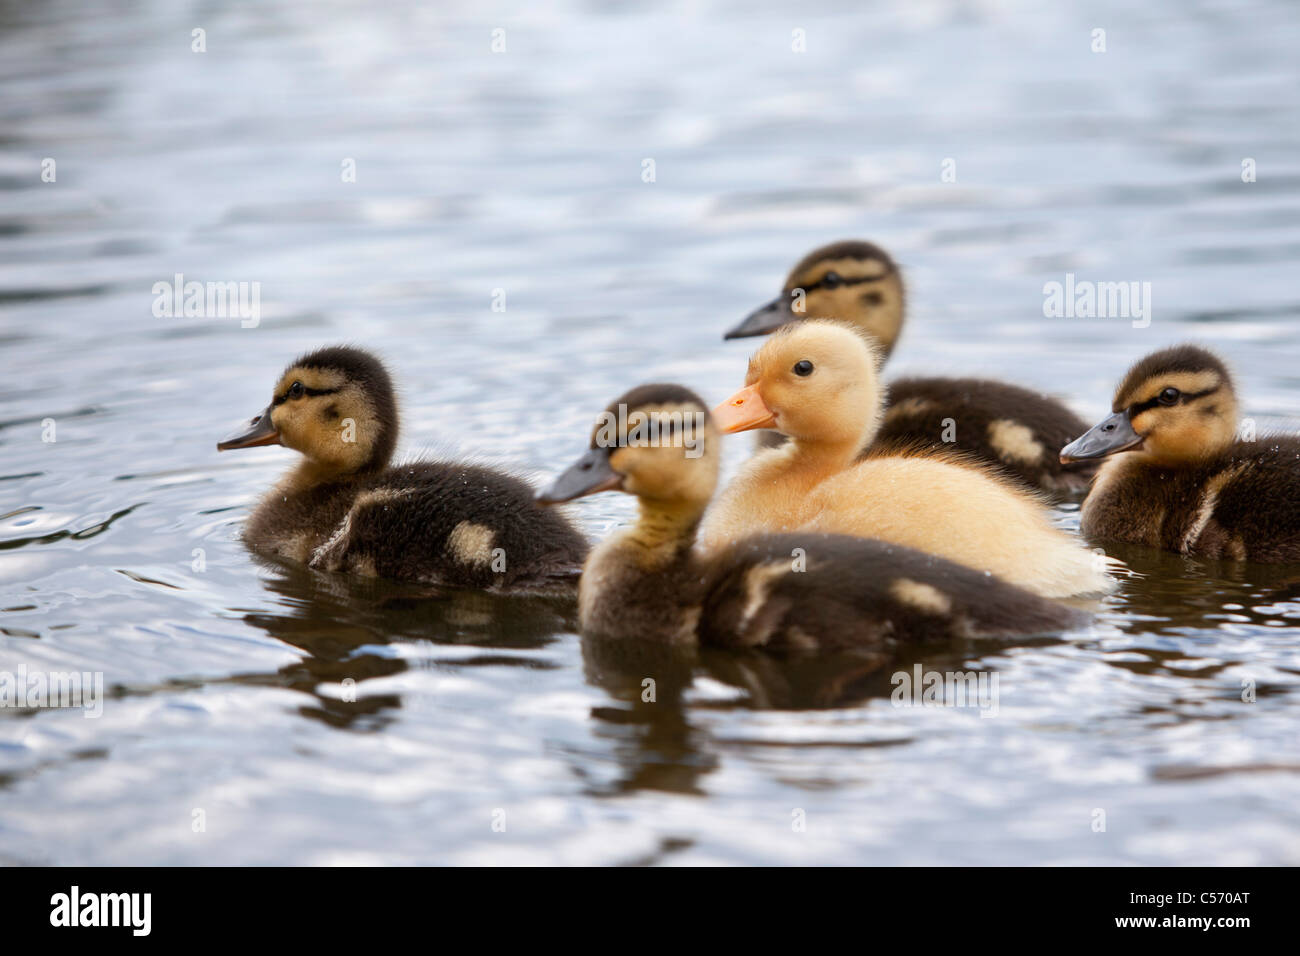 The Netherlands, 's-Graveland, Young ducks in pond. Ducklings. Stock Photo